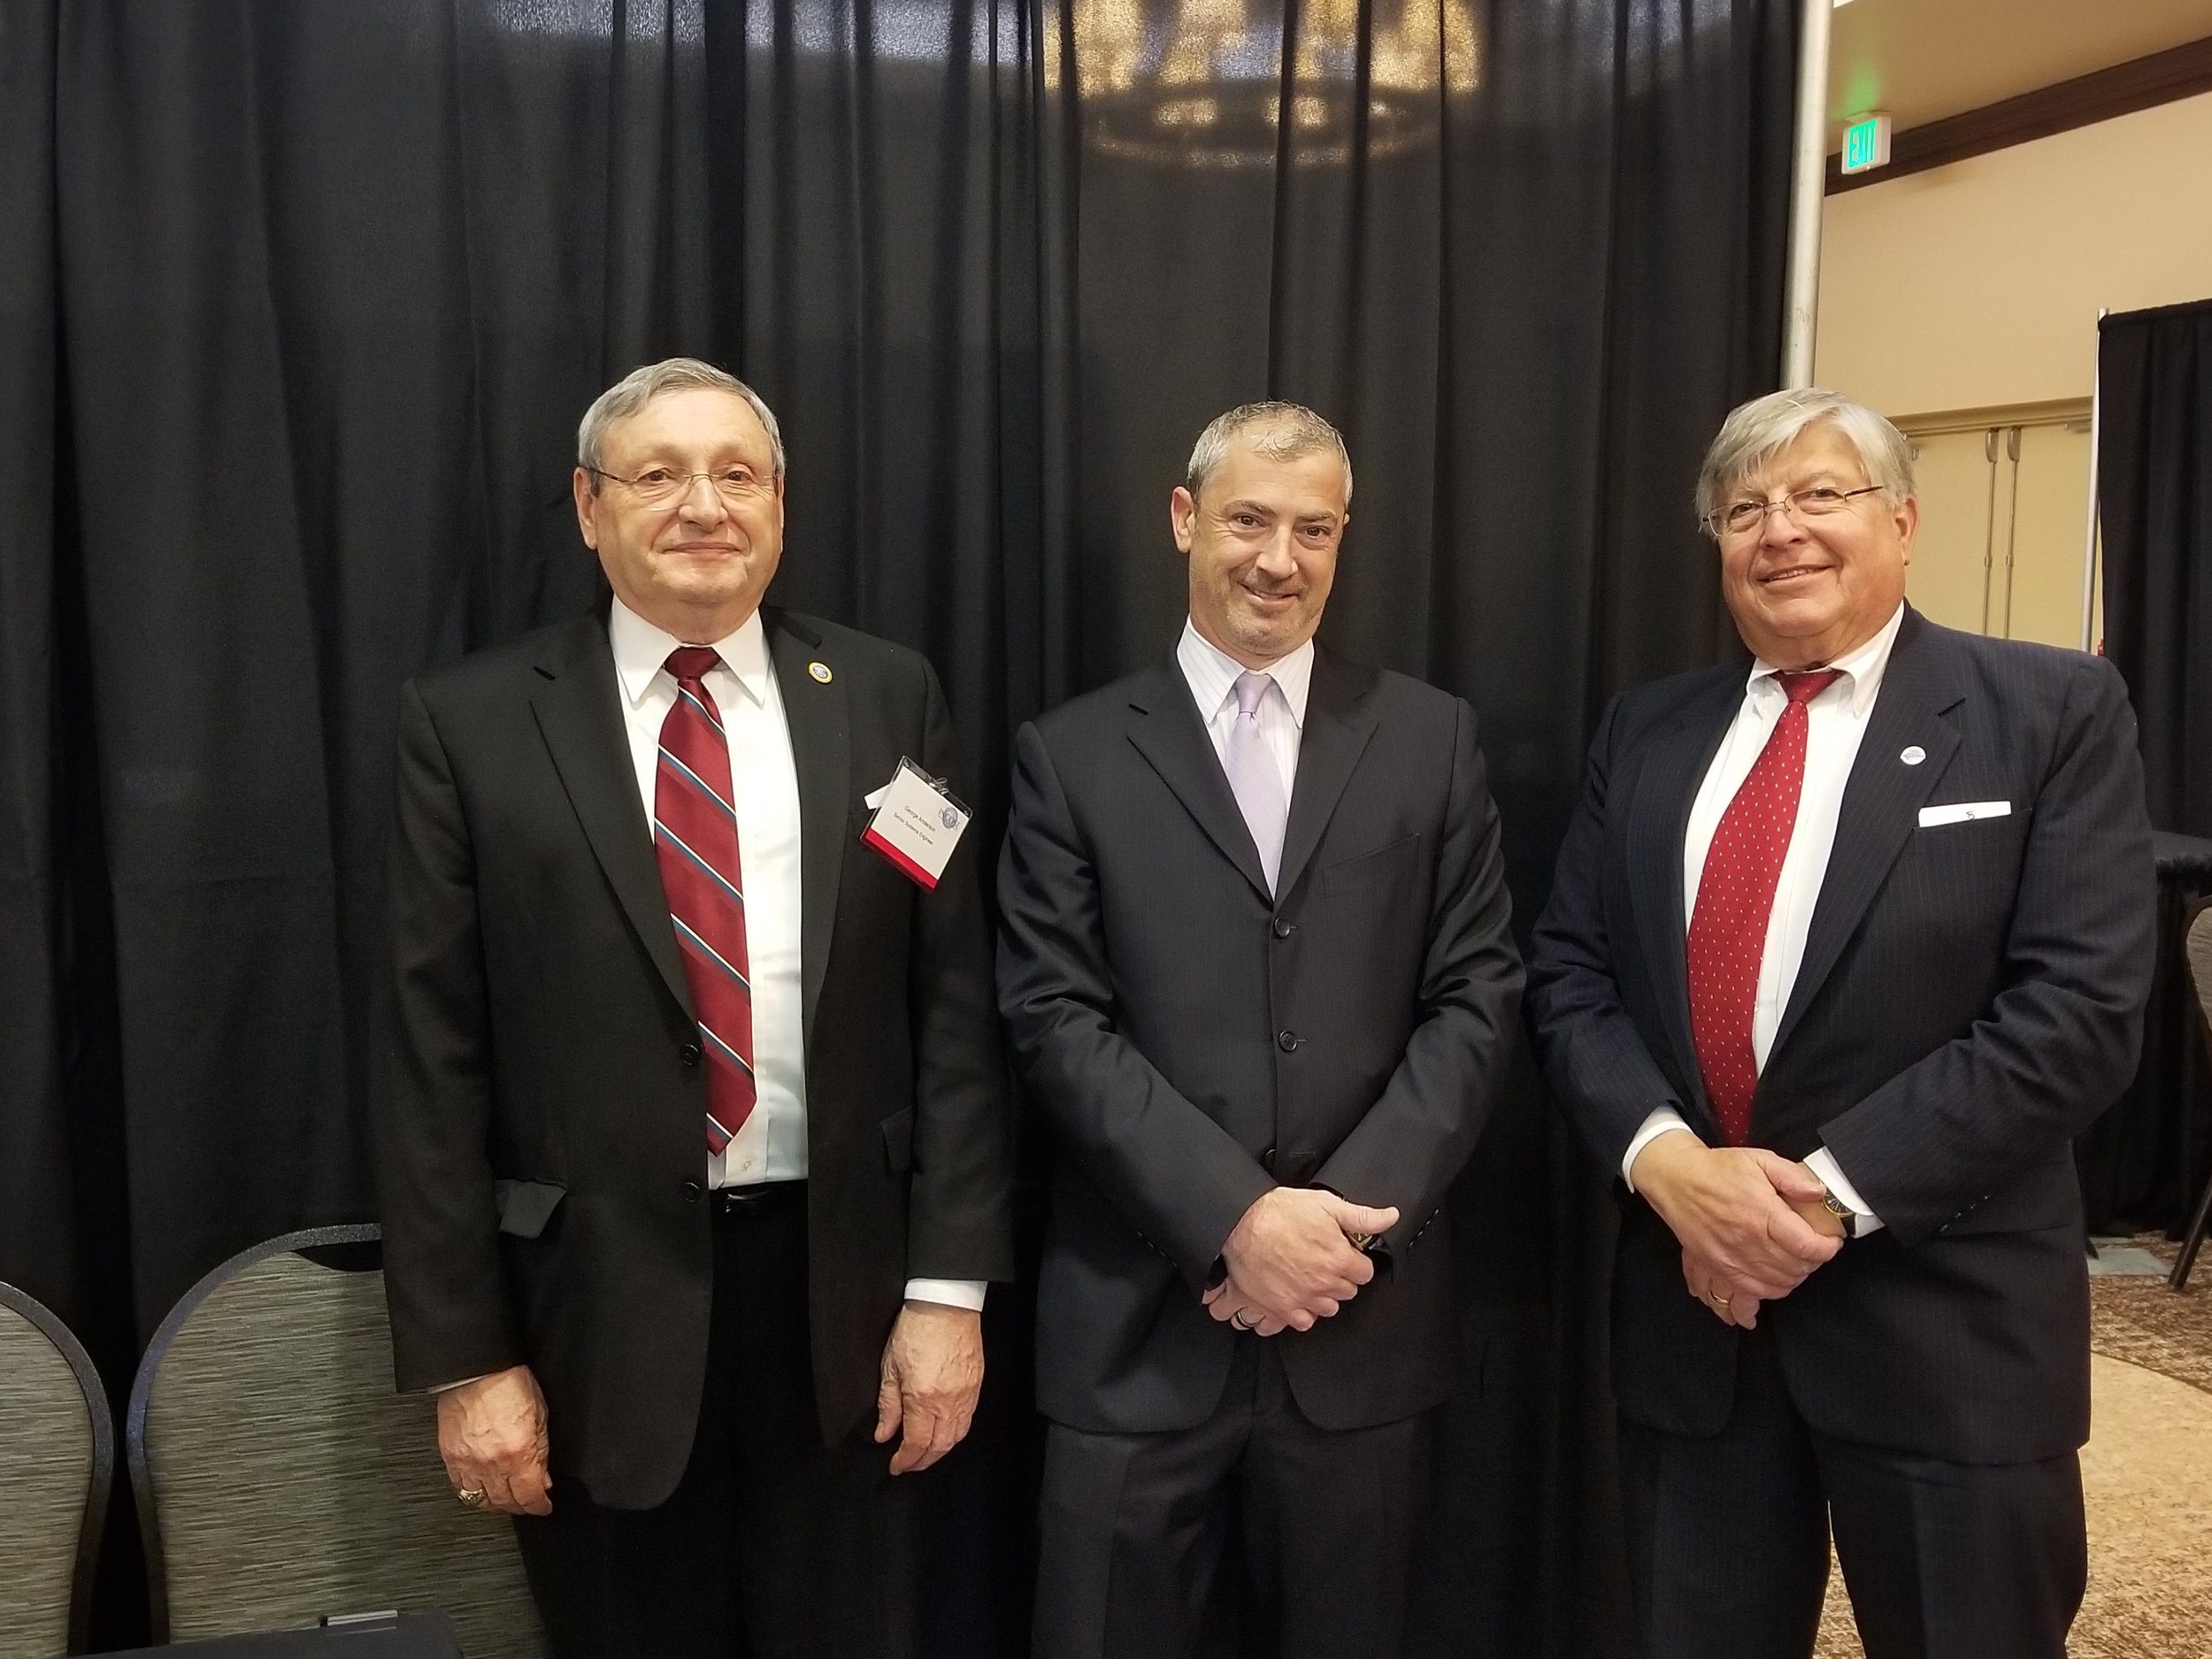  George Anderson, Ken Fuller and Charles at the March 26, 2018 reStart job fair 